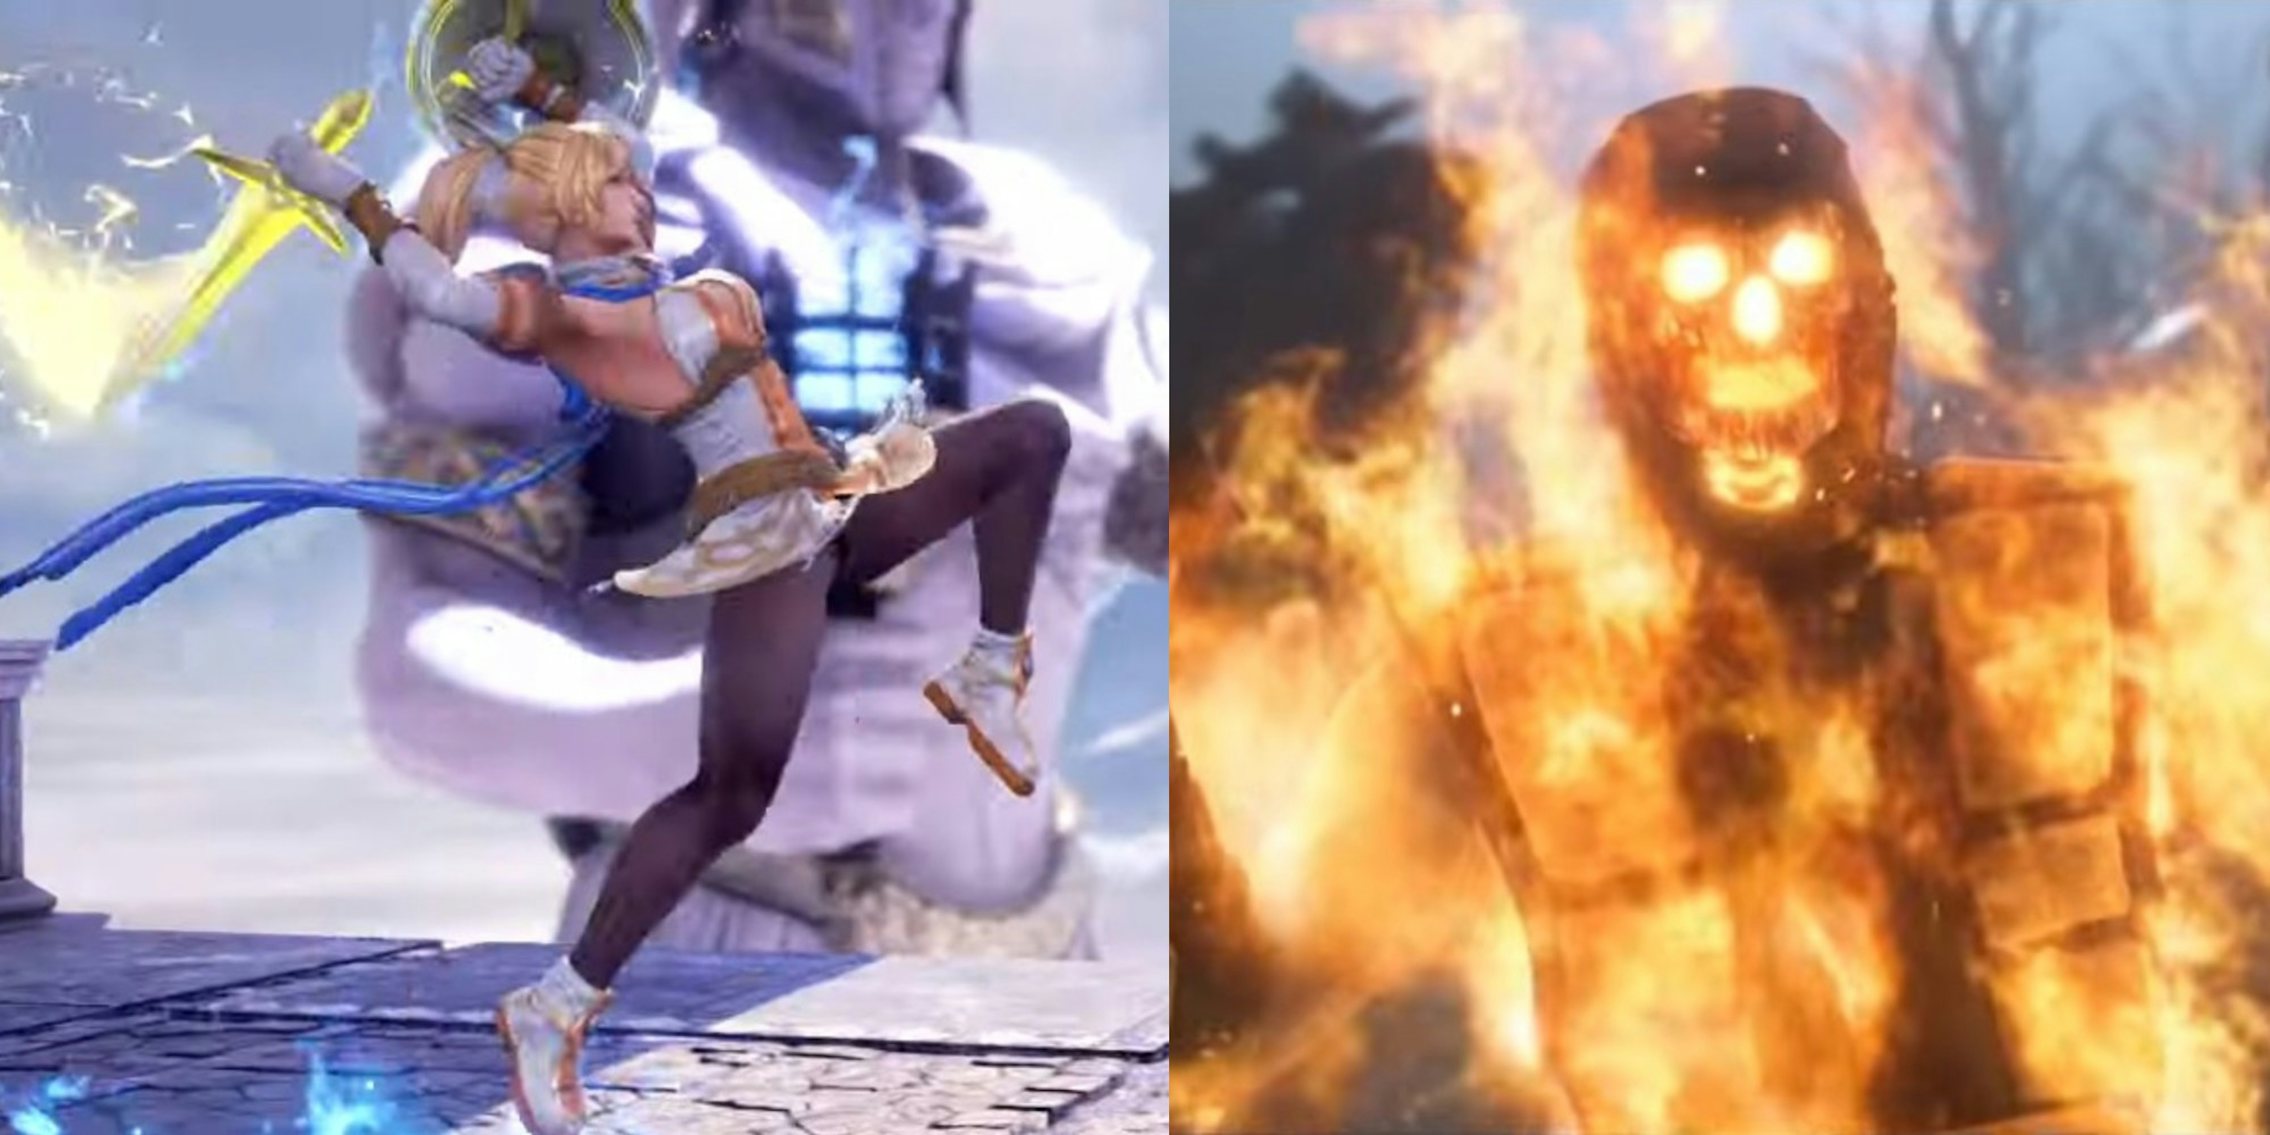 2019 is the best year ever for fighting games